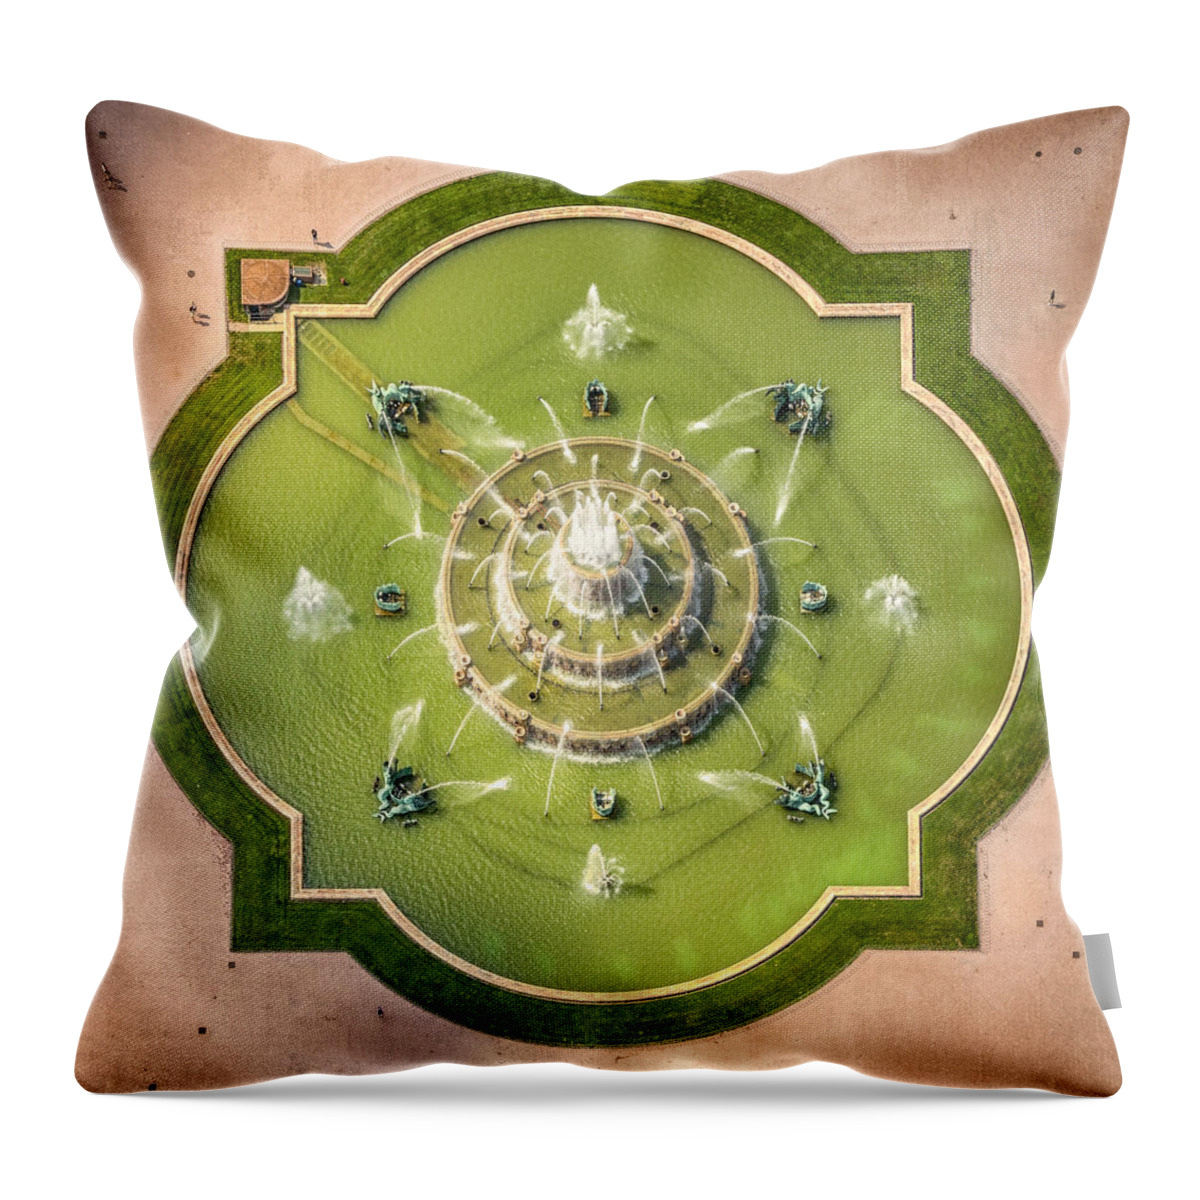 3scape Throw Pillow featuring the photograph Buckingham Fountain From Above by Adam Romanowicz